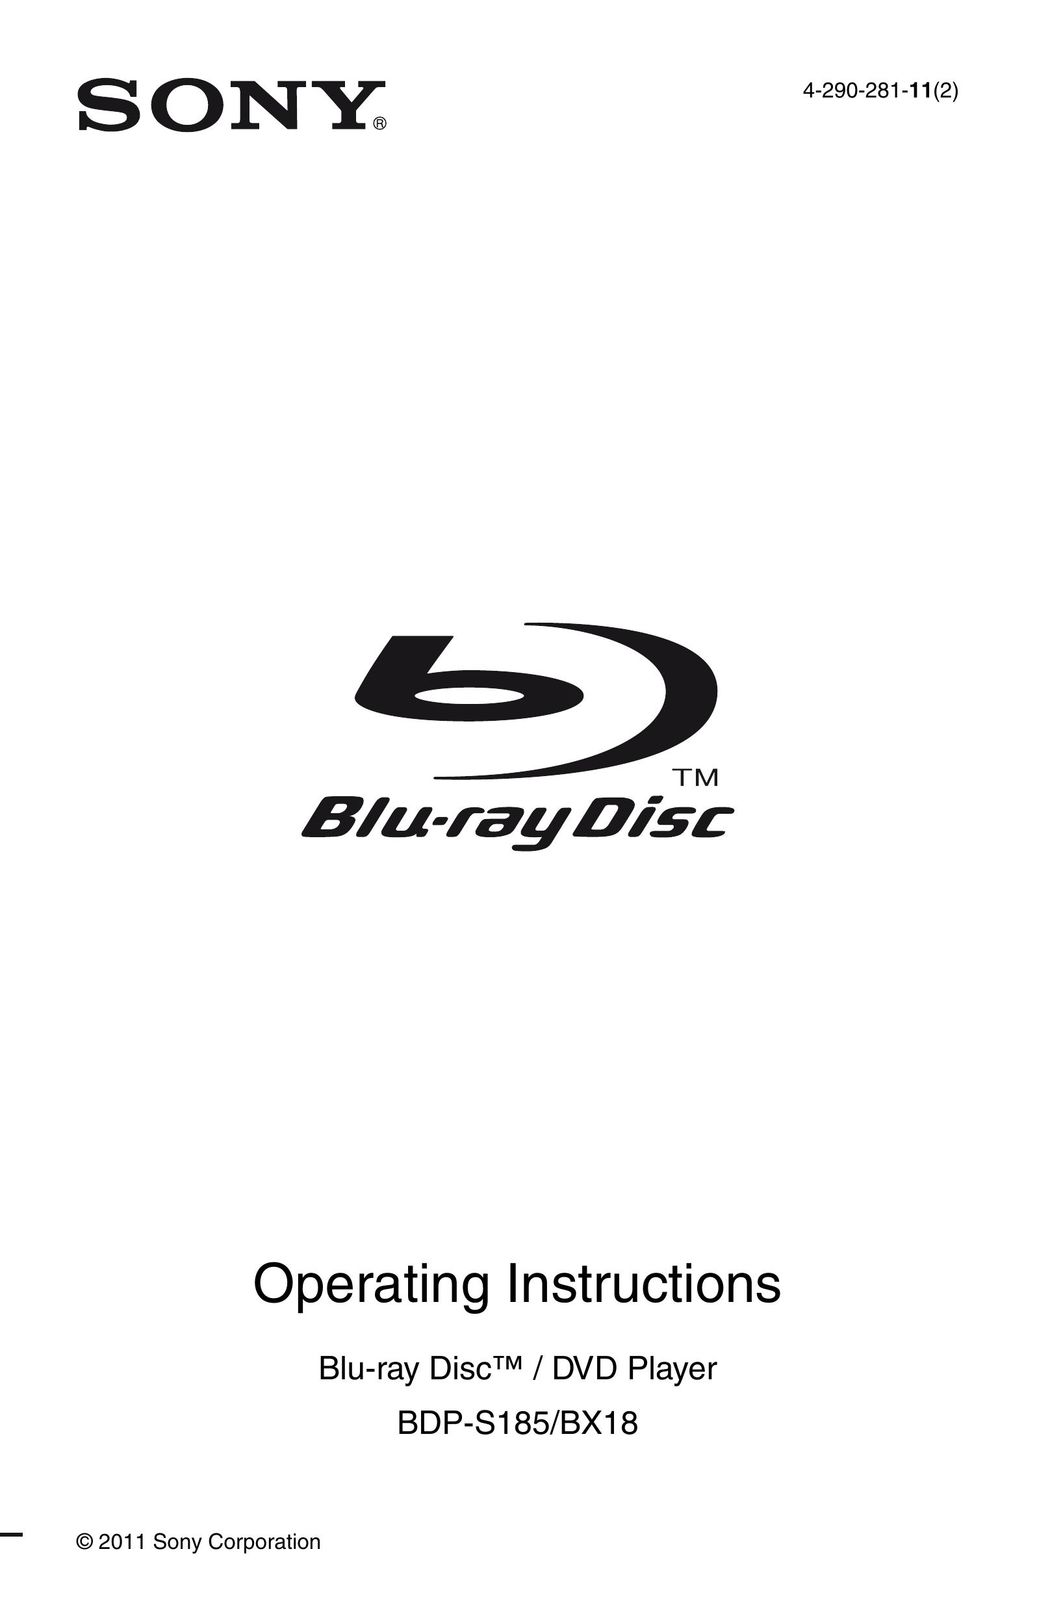 Sony BDP-S185/BX18 Blu-ray Player User Manual